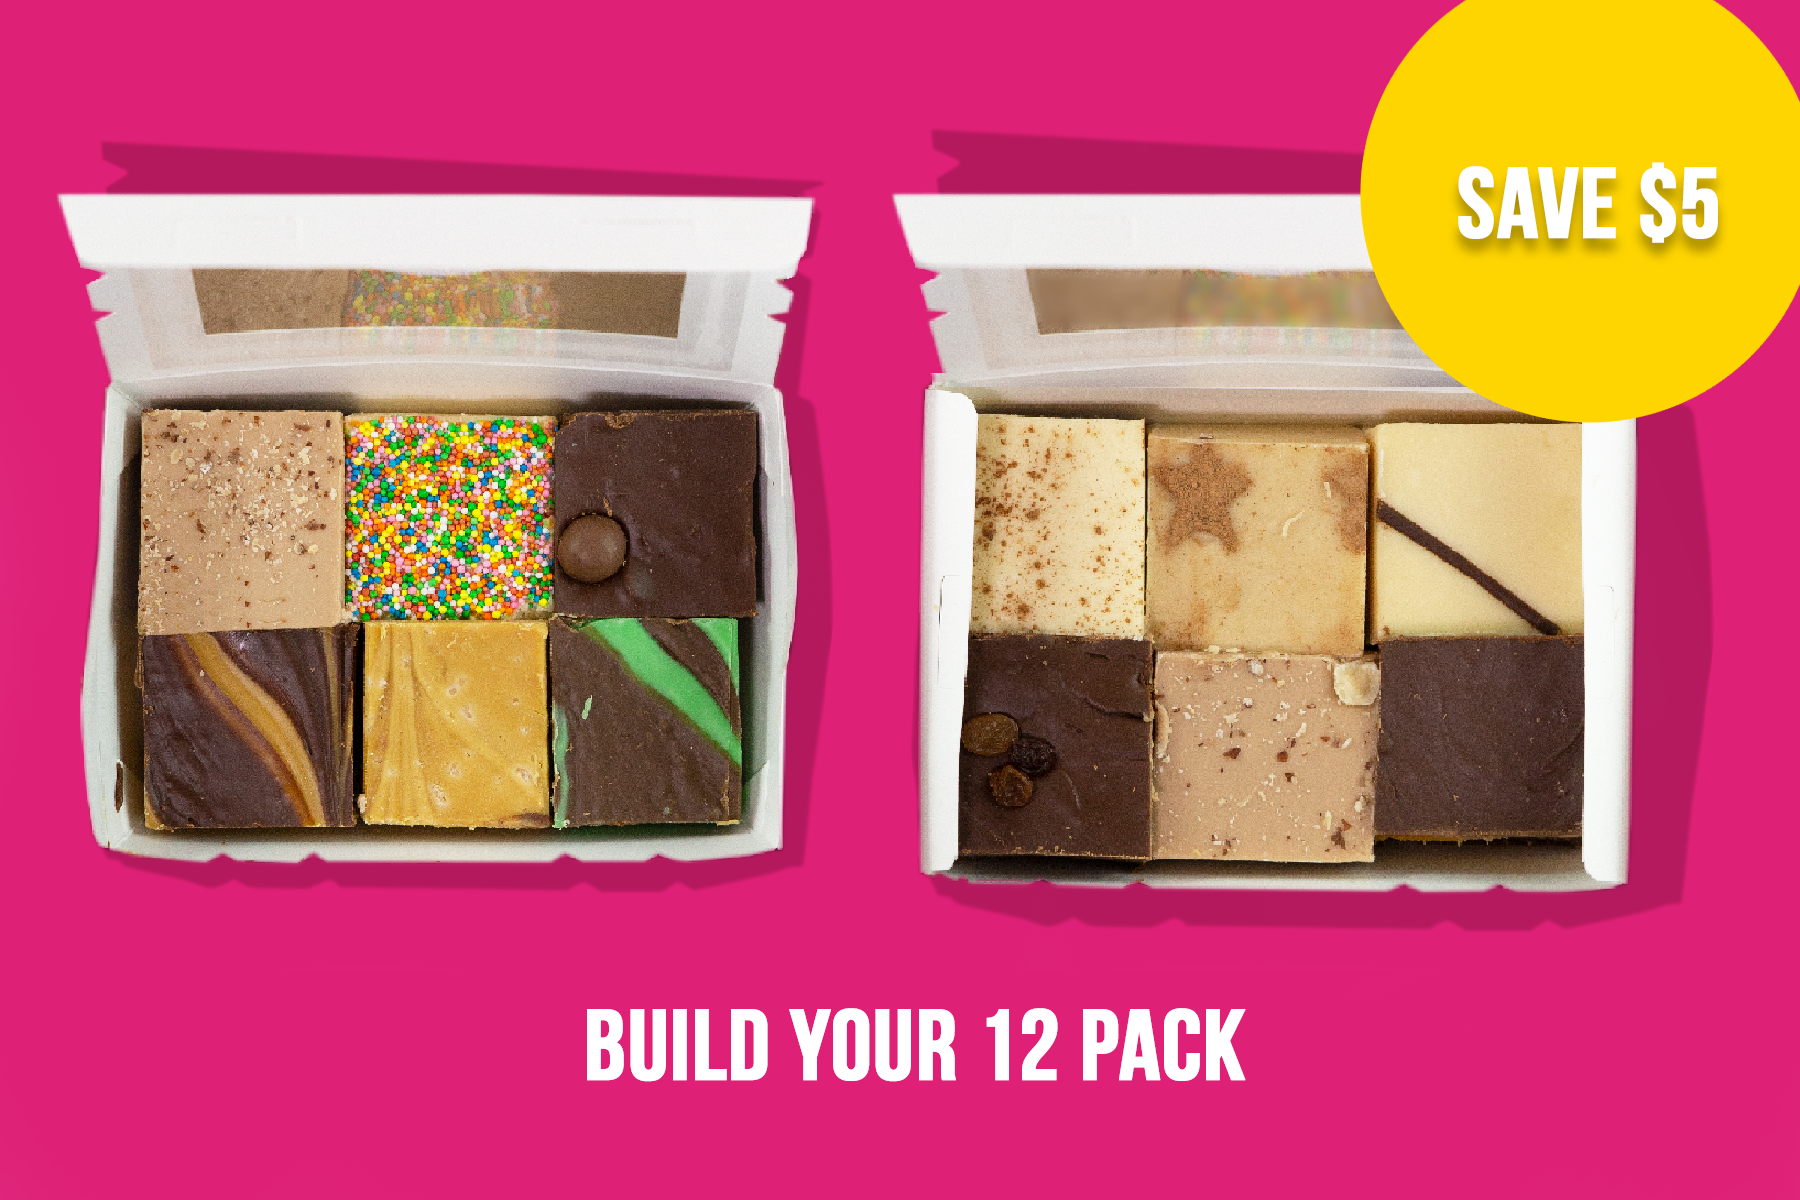 BUILD YOUR OWN FUDGE BOX WITH UP TO 12 INDIVIDUAL FUDGE SQUARES